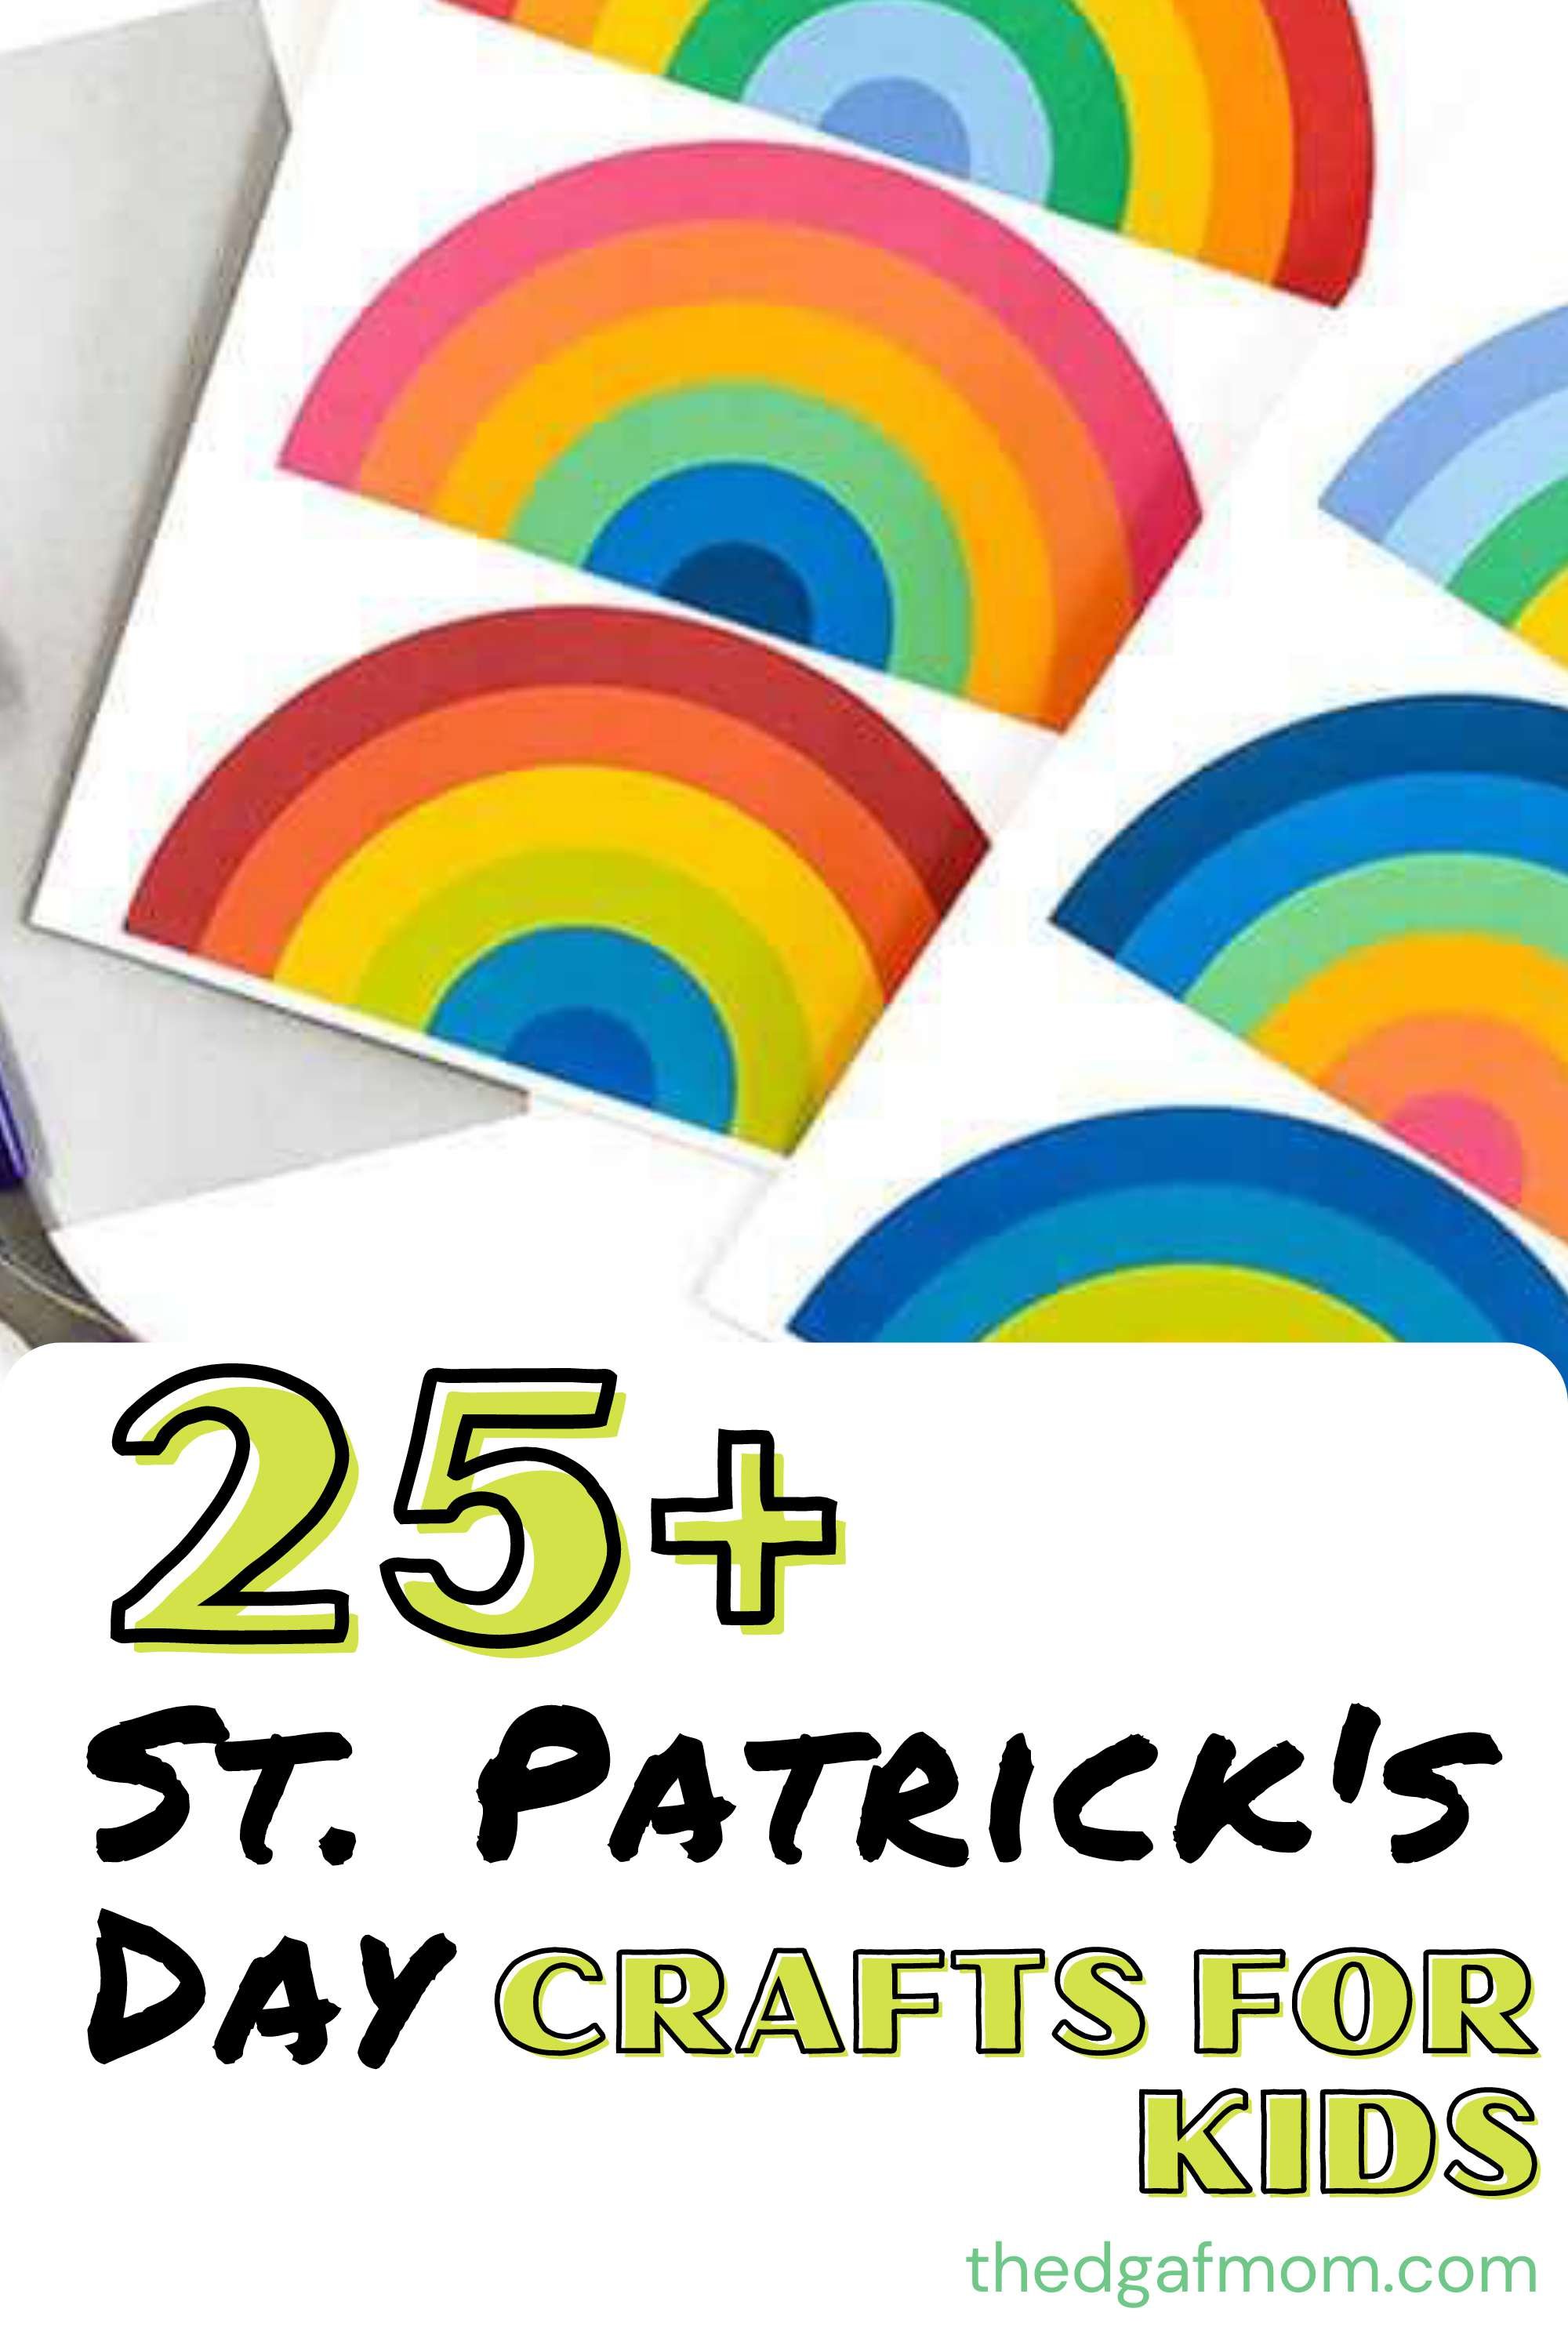 Looking for fun crafts to do with your kids this St. Patrick's day? Check out these 25+ creative ideas that are sure to be a hit! These projects will help your children work on important skills like cutting and pasting while giving them a sense of ac